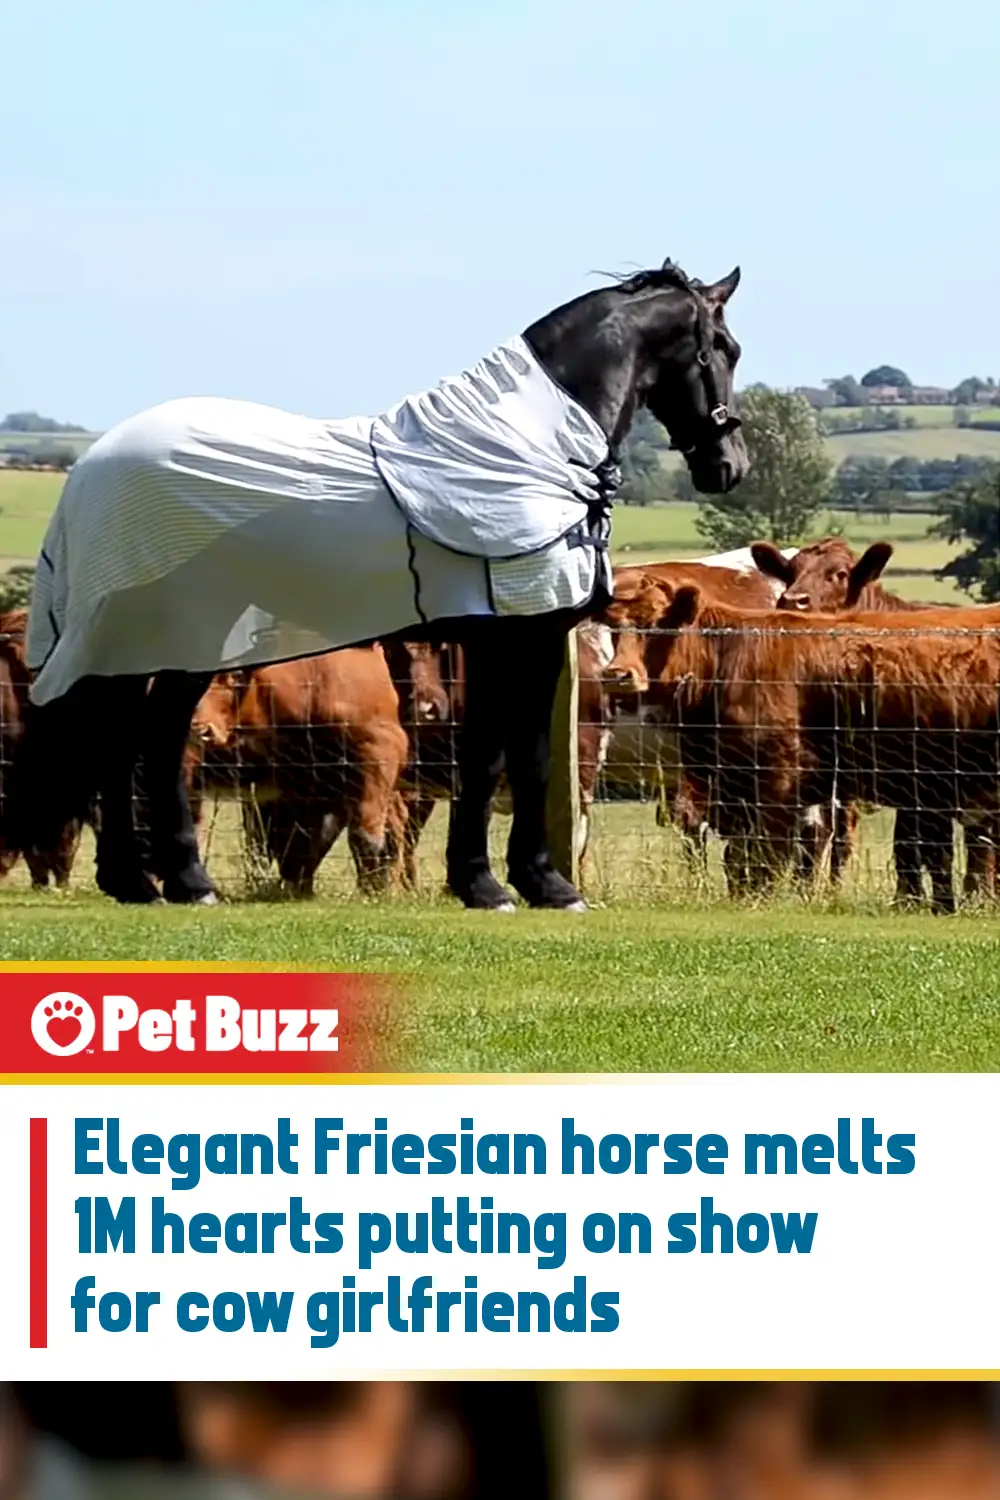 Elegant Friesian horse melts 1M hearts putting on show for cow girlfriends